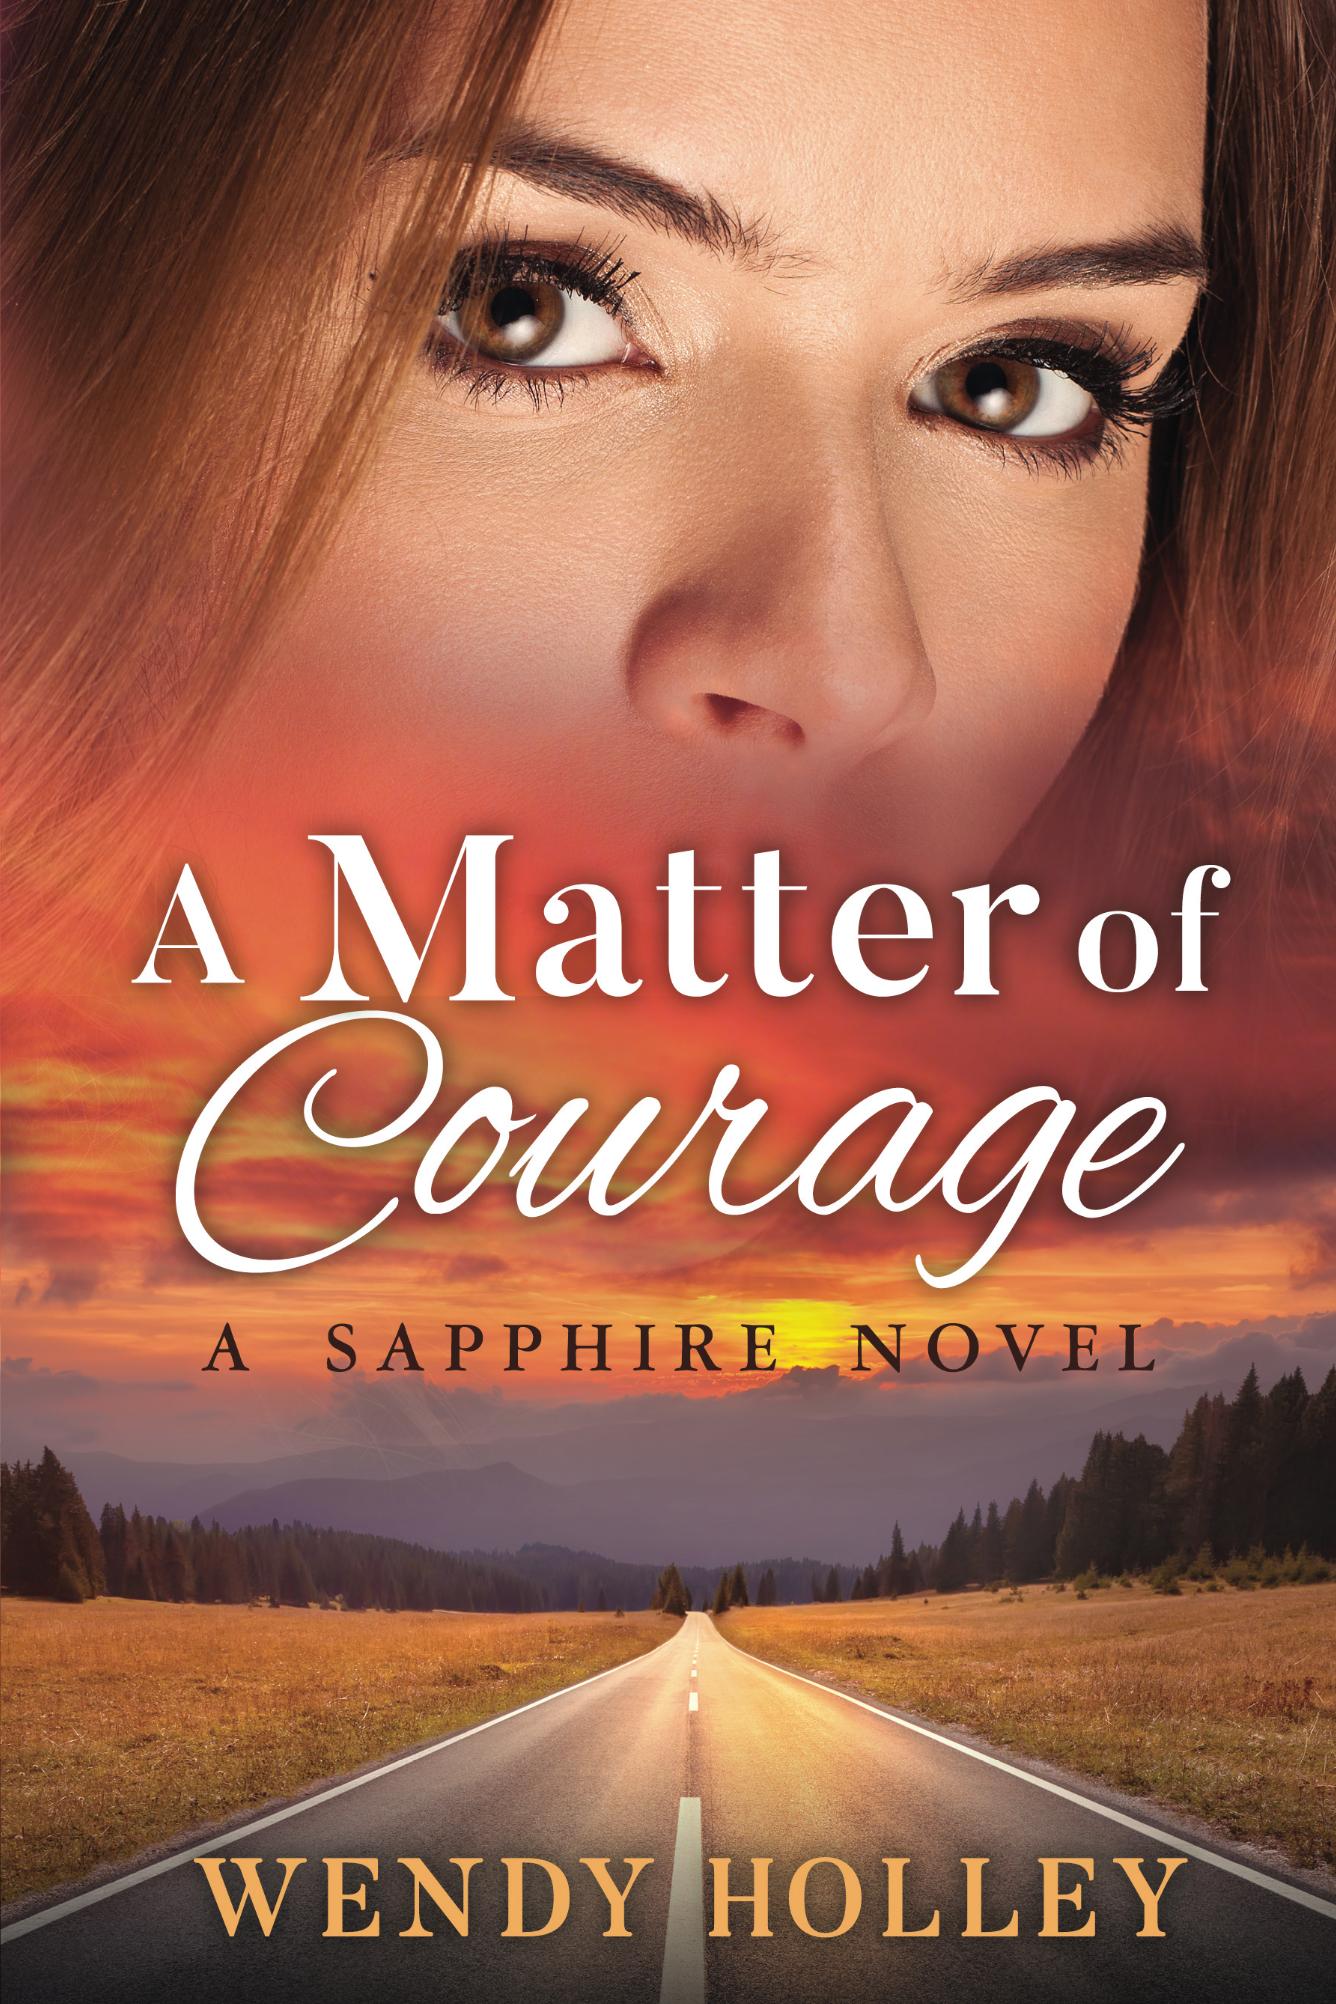 FREE: A Matter of Courage by Wendy Holley